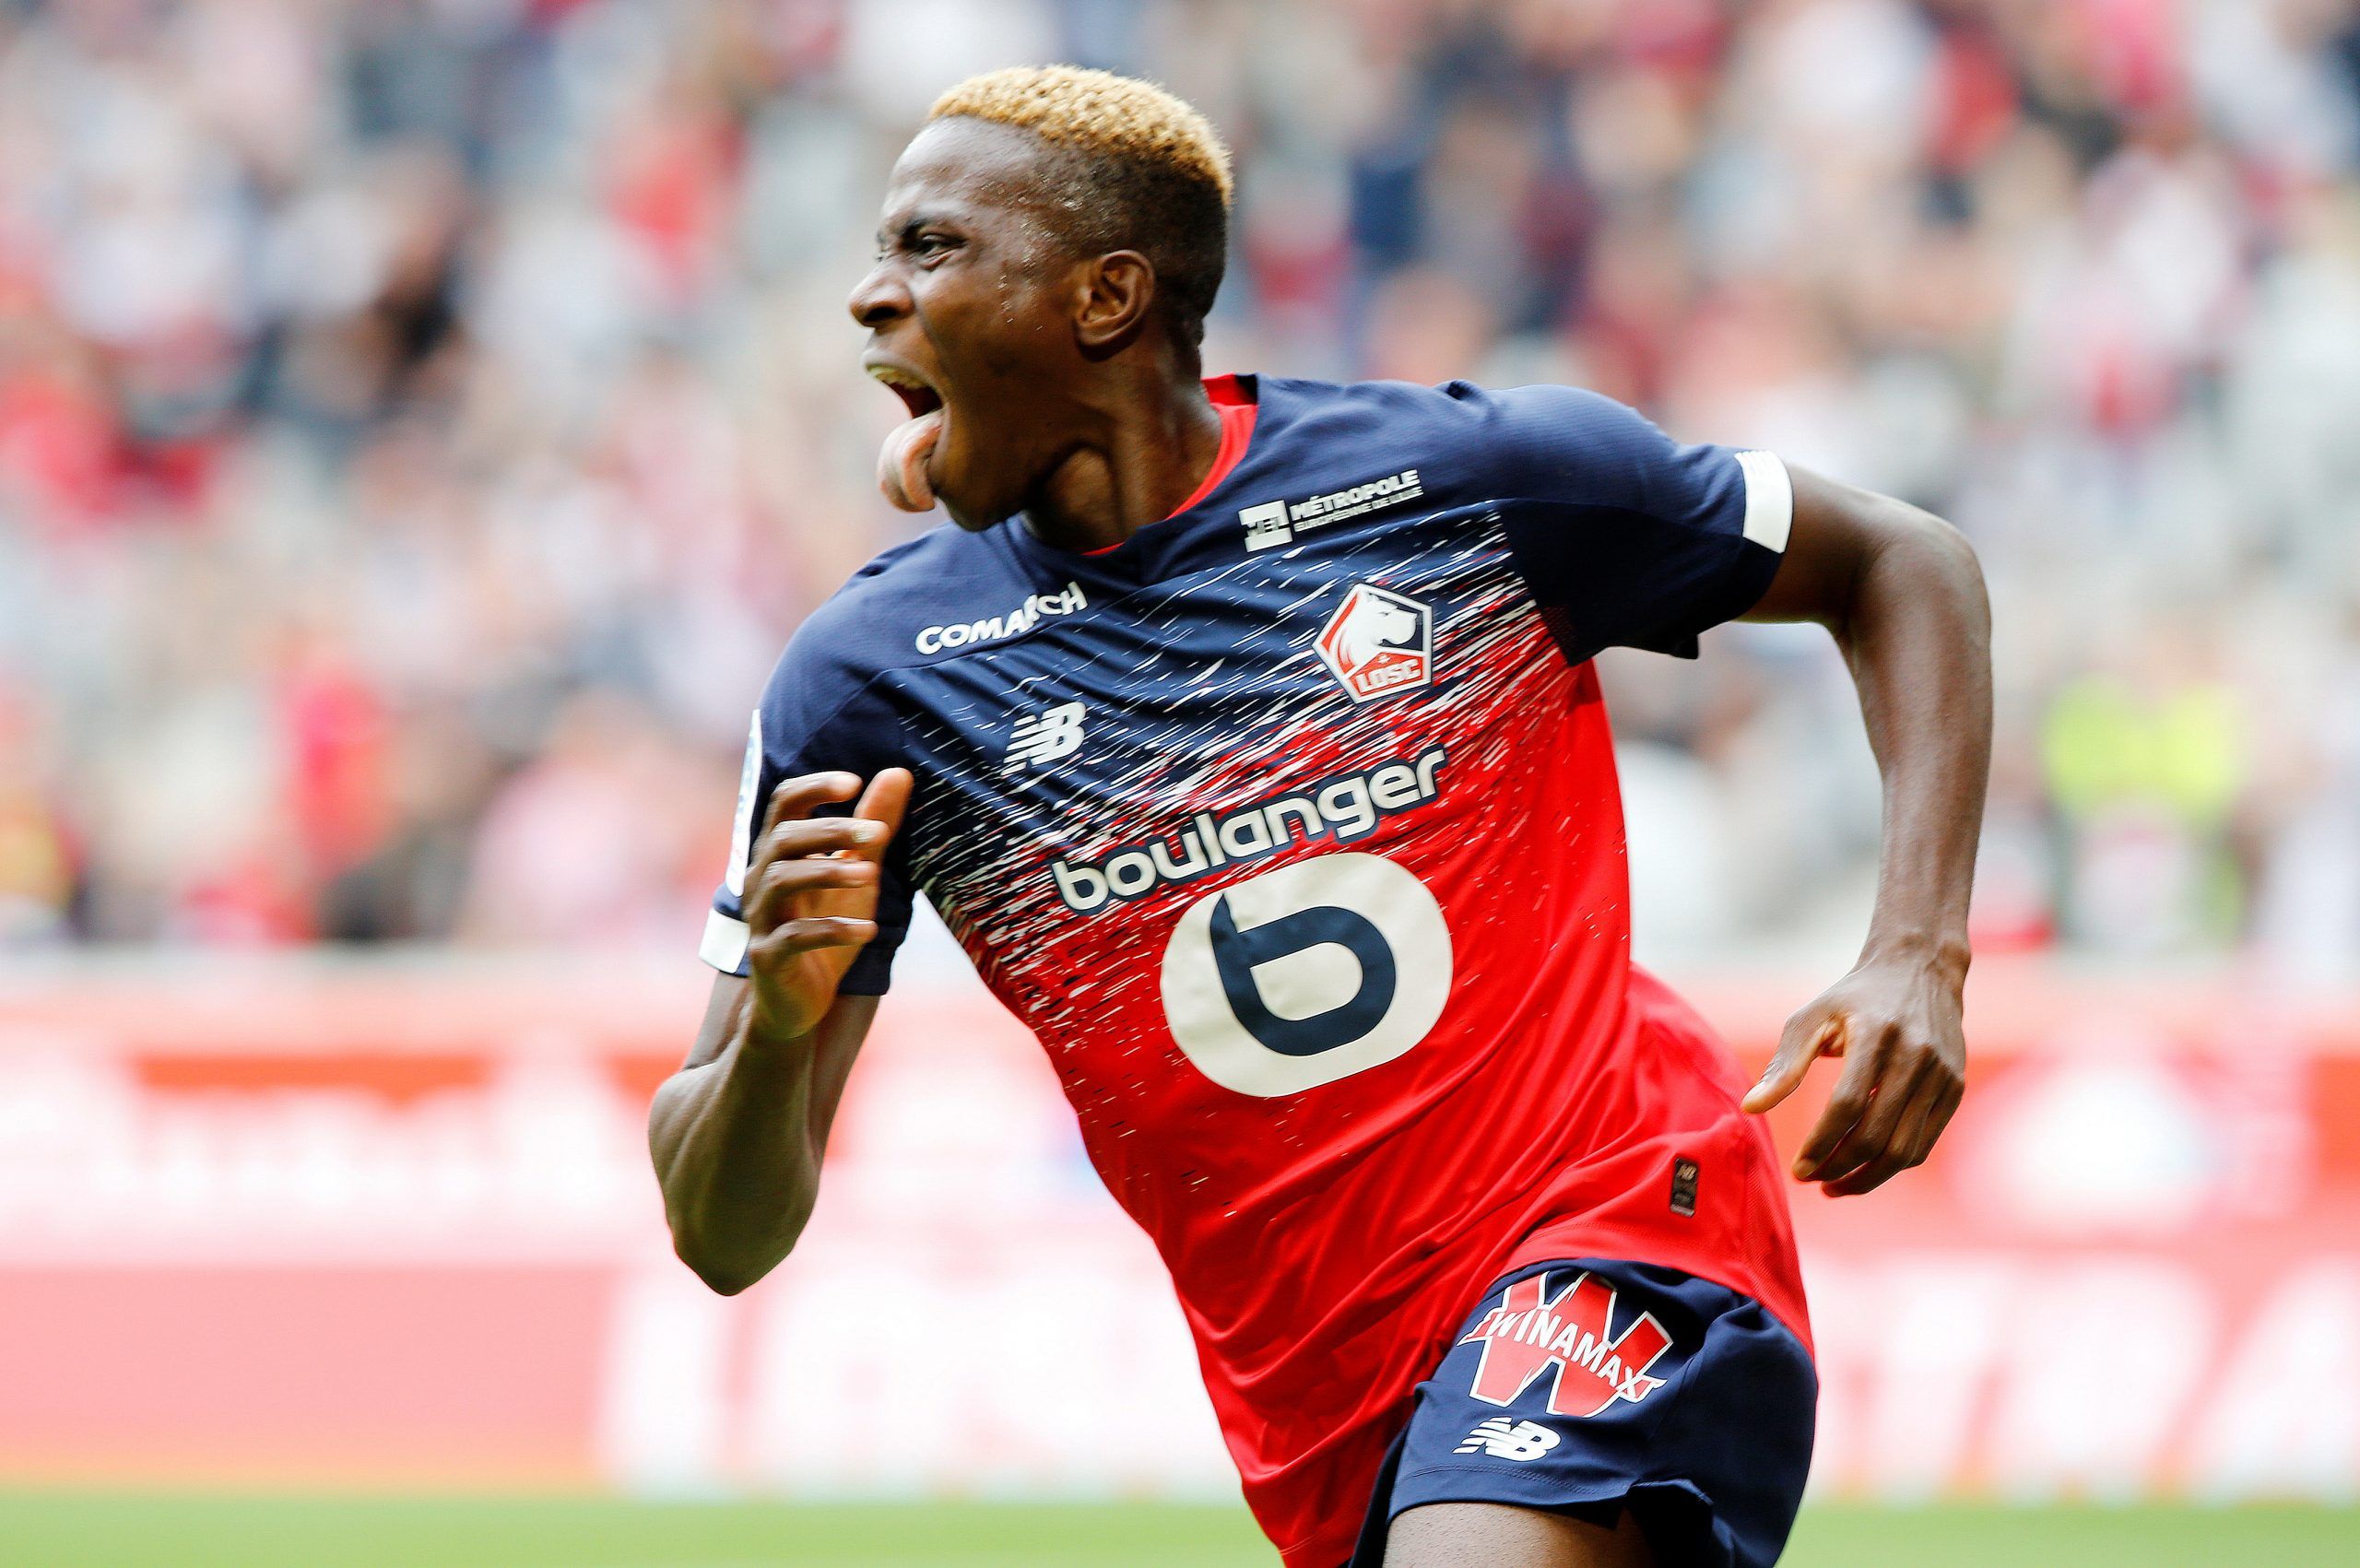 Soccer Football - Ligue 1 - Lille v Nantes - Stade Pierre-Mauroy, Lille, France - August 11, 2019  Lille's Victor Osimhen celebrates scoring their first goal   REUTERS/Pascal Rossignol